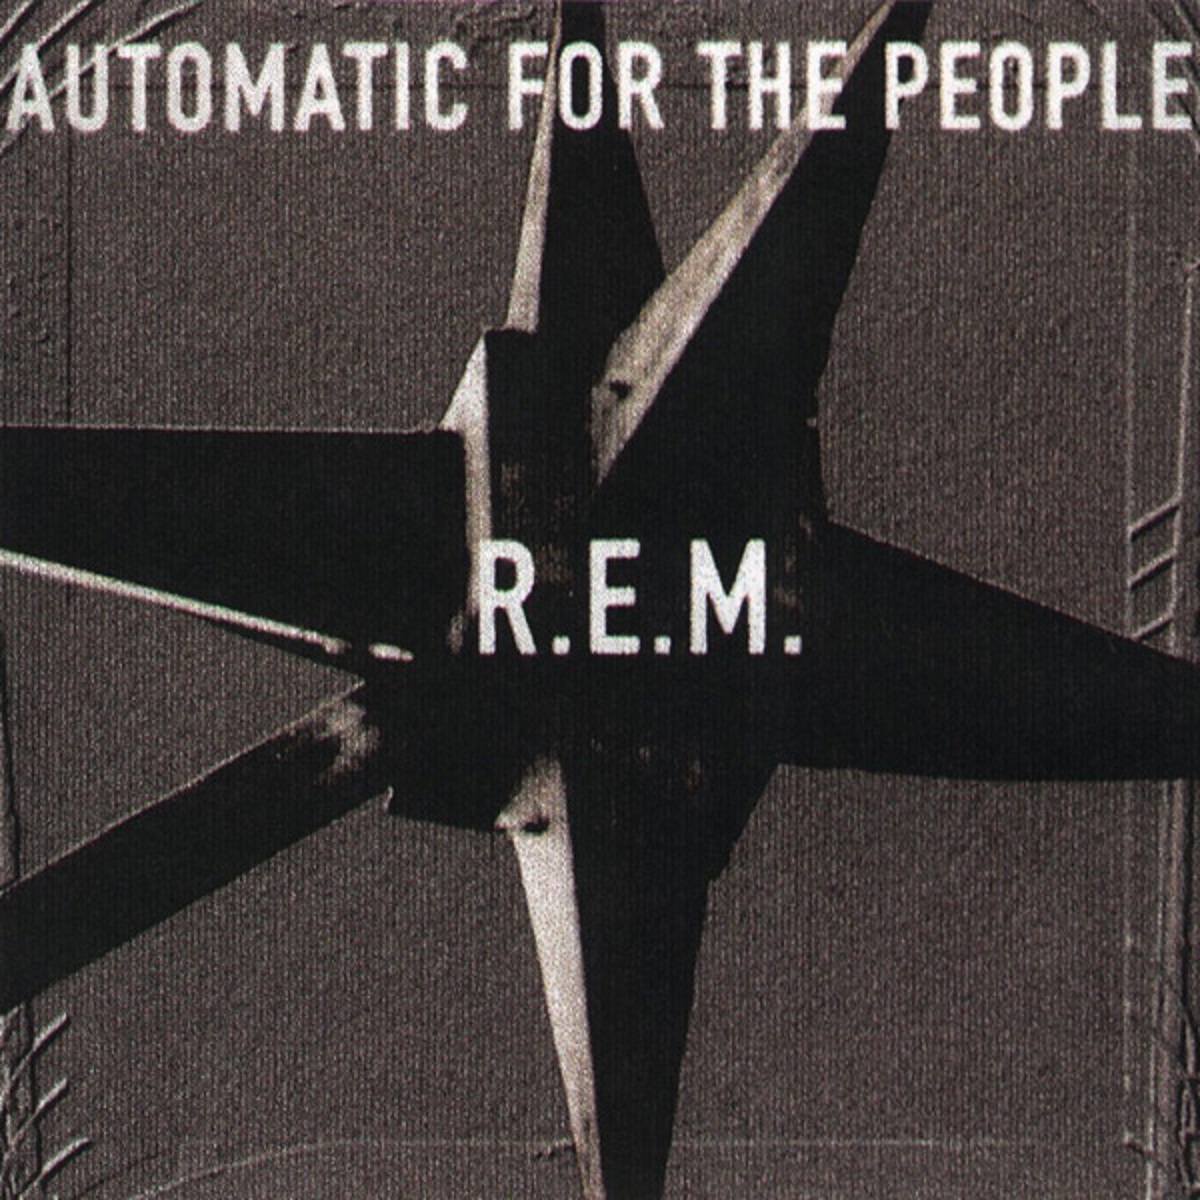 Cover of the album "Automatic for the People" by R.E.M.